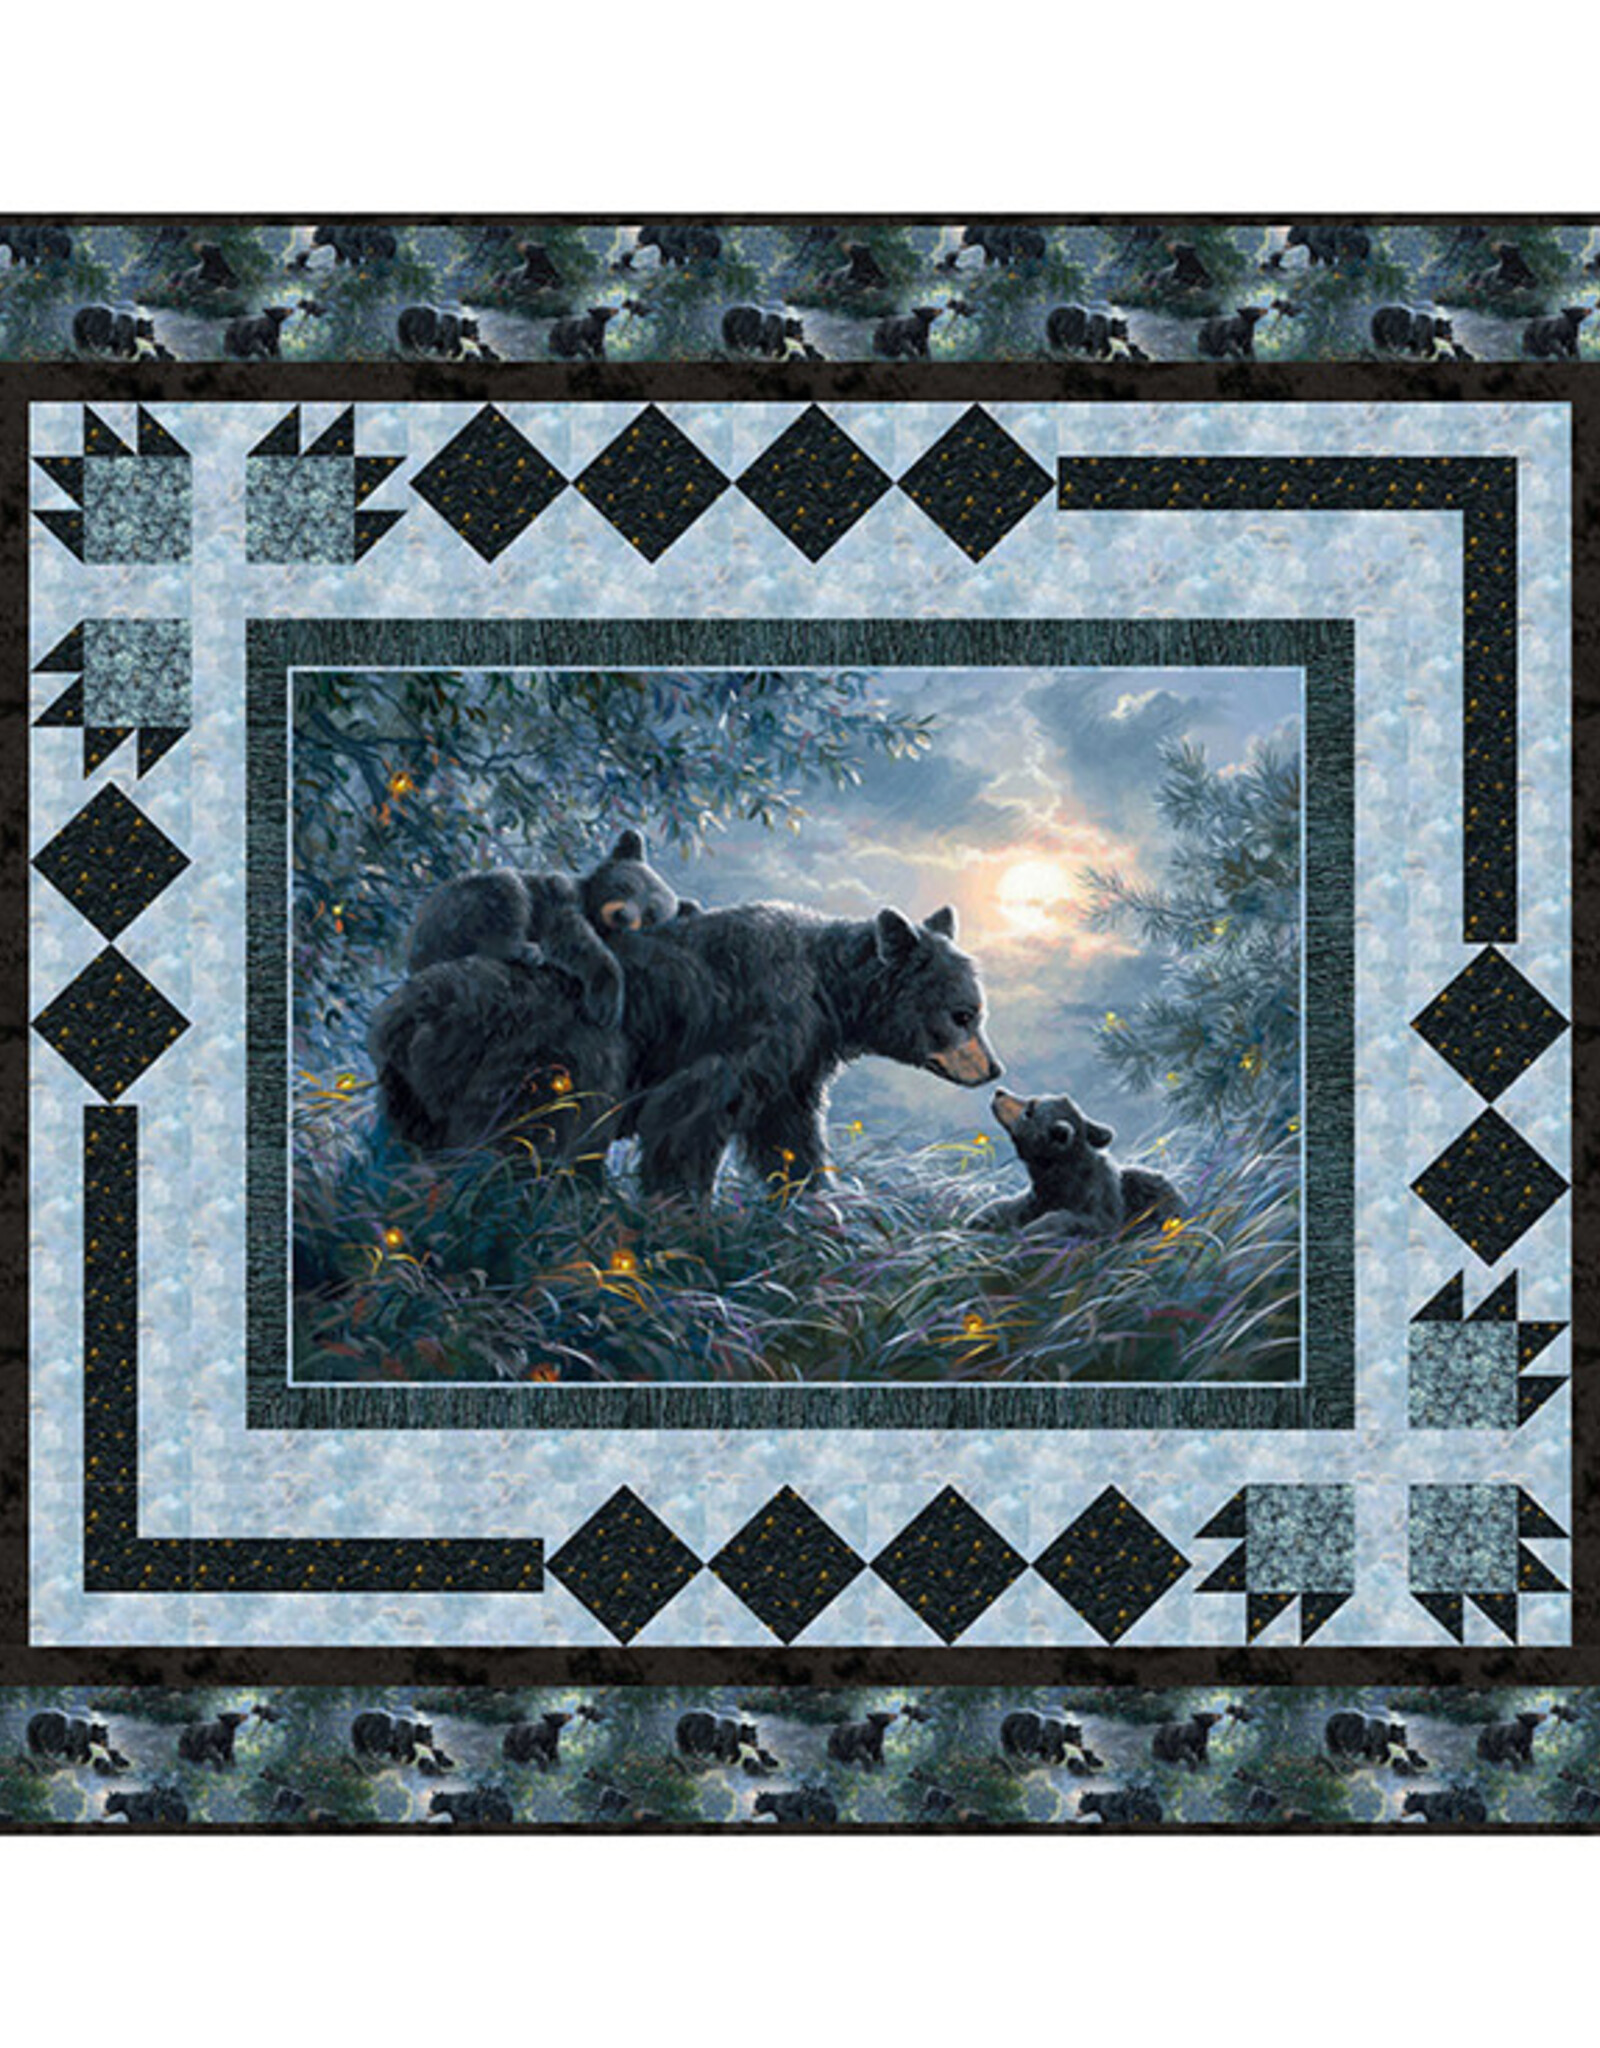 Northcott Paws for a Bit Quilt Kit 70"x59"